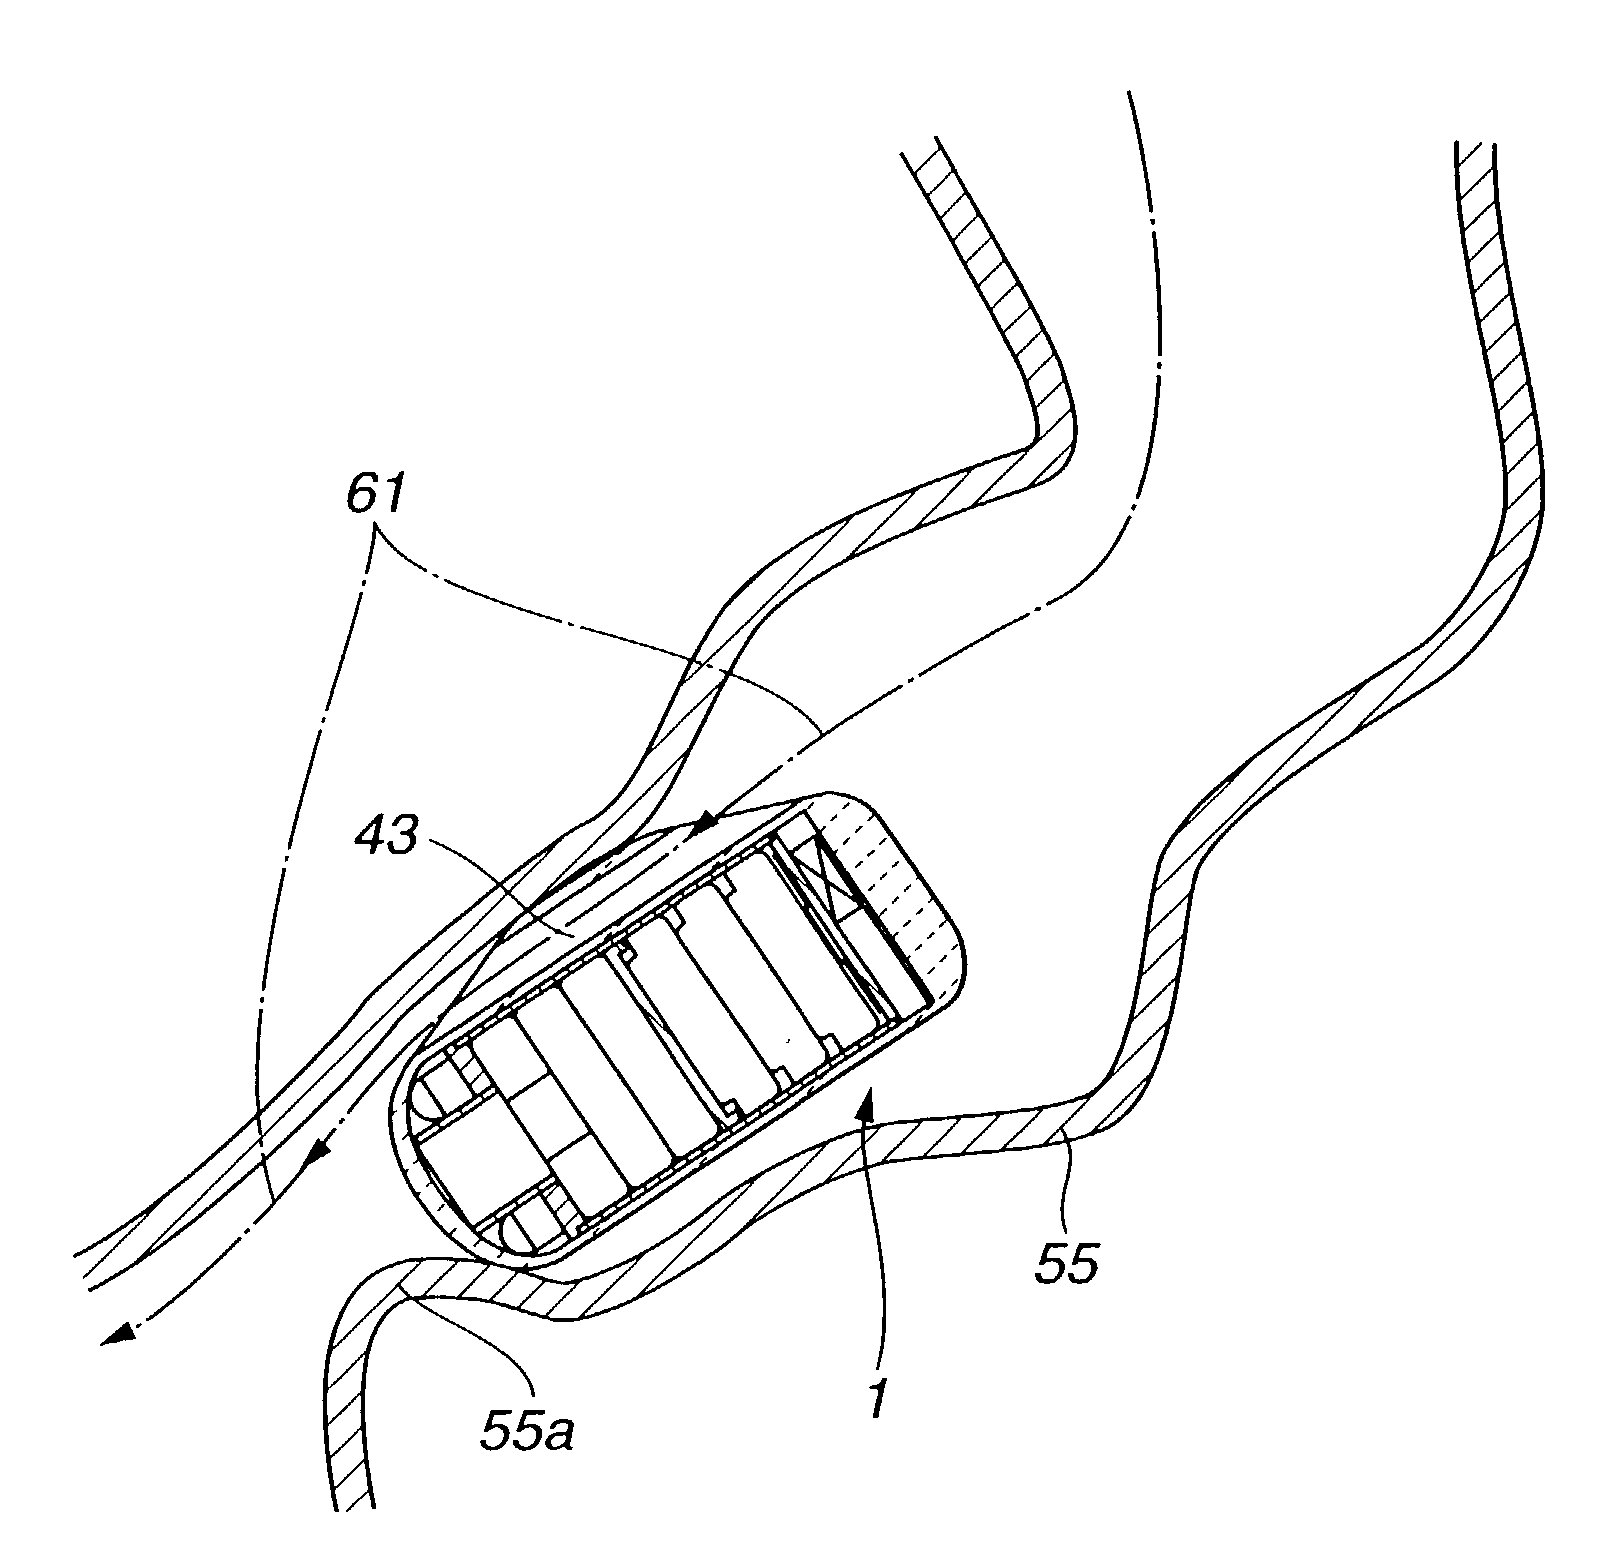 Encapsulated medical device and method of examining, curing, and treating internal region of body cavity using encapsulated medical device